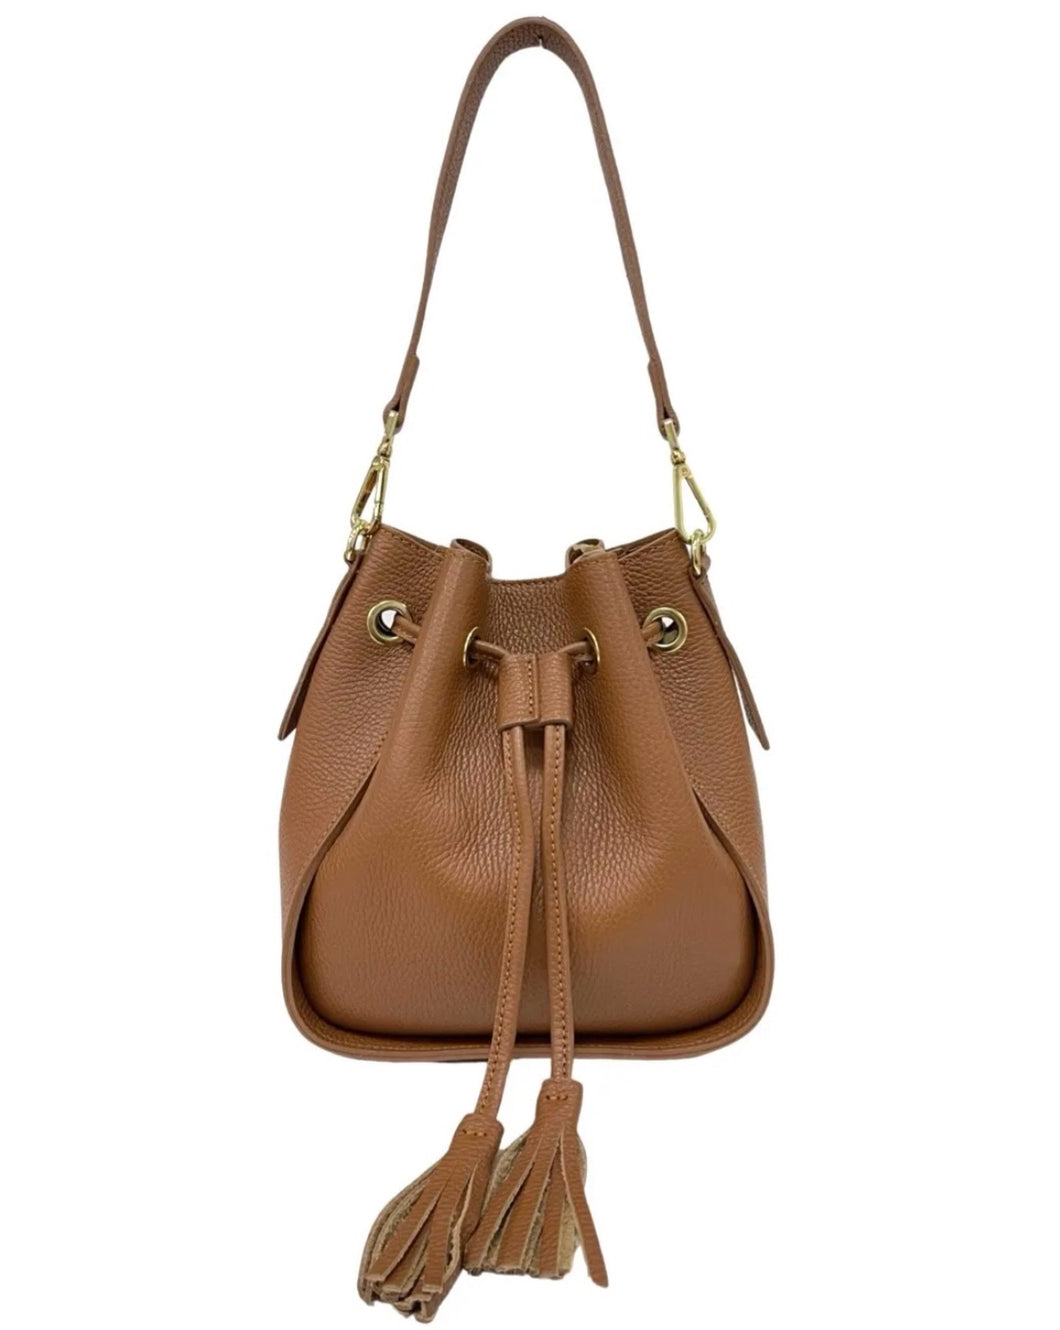 Lily Cognac Leather Hand Bag